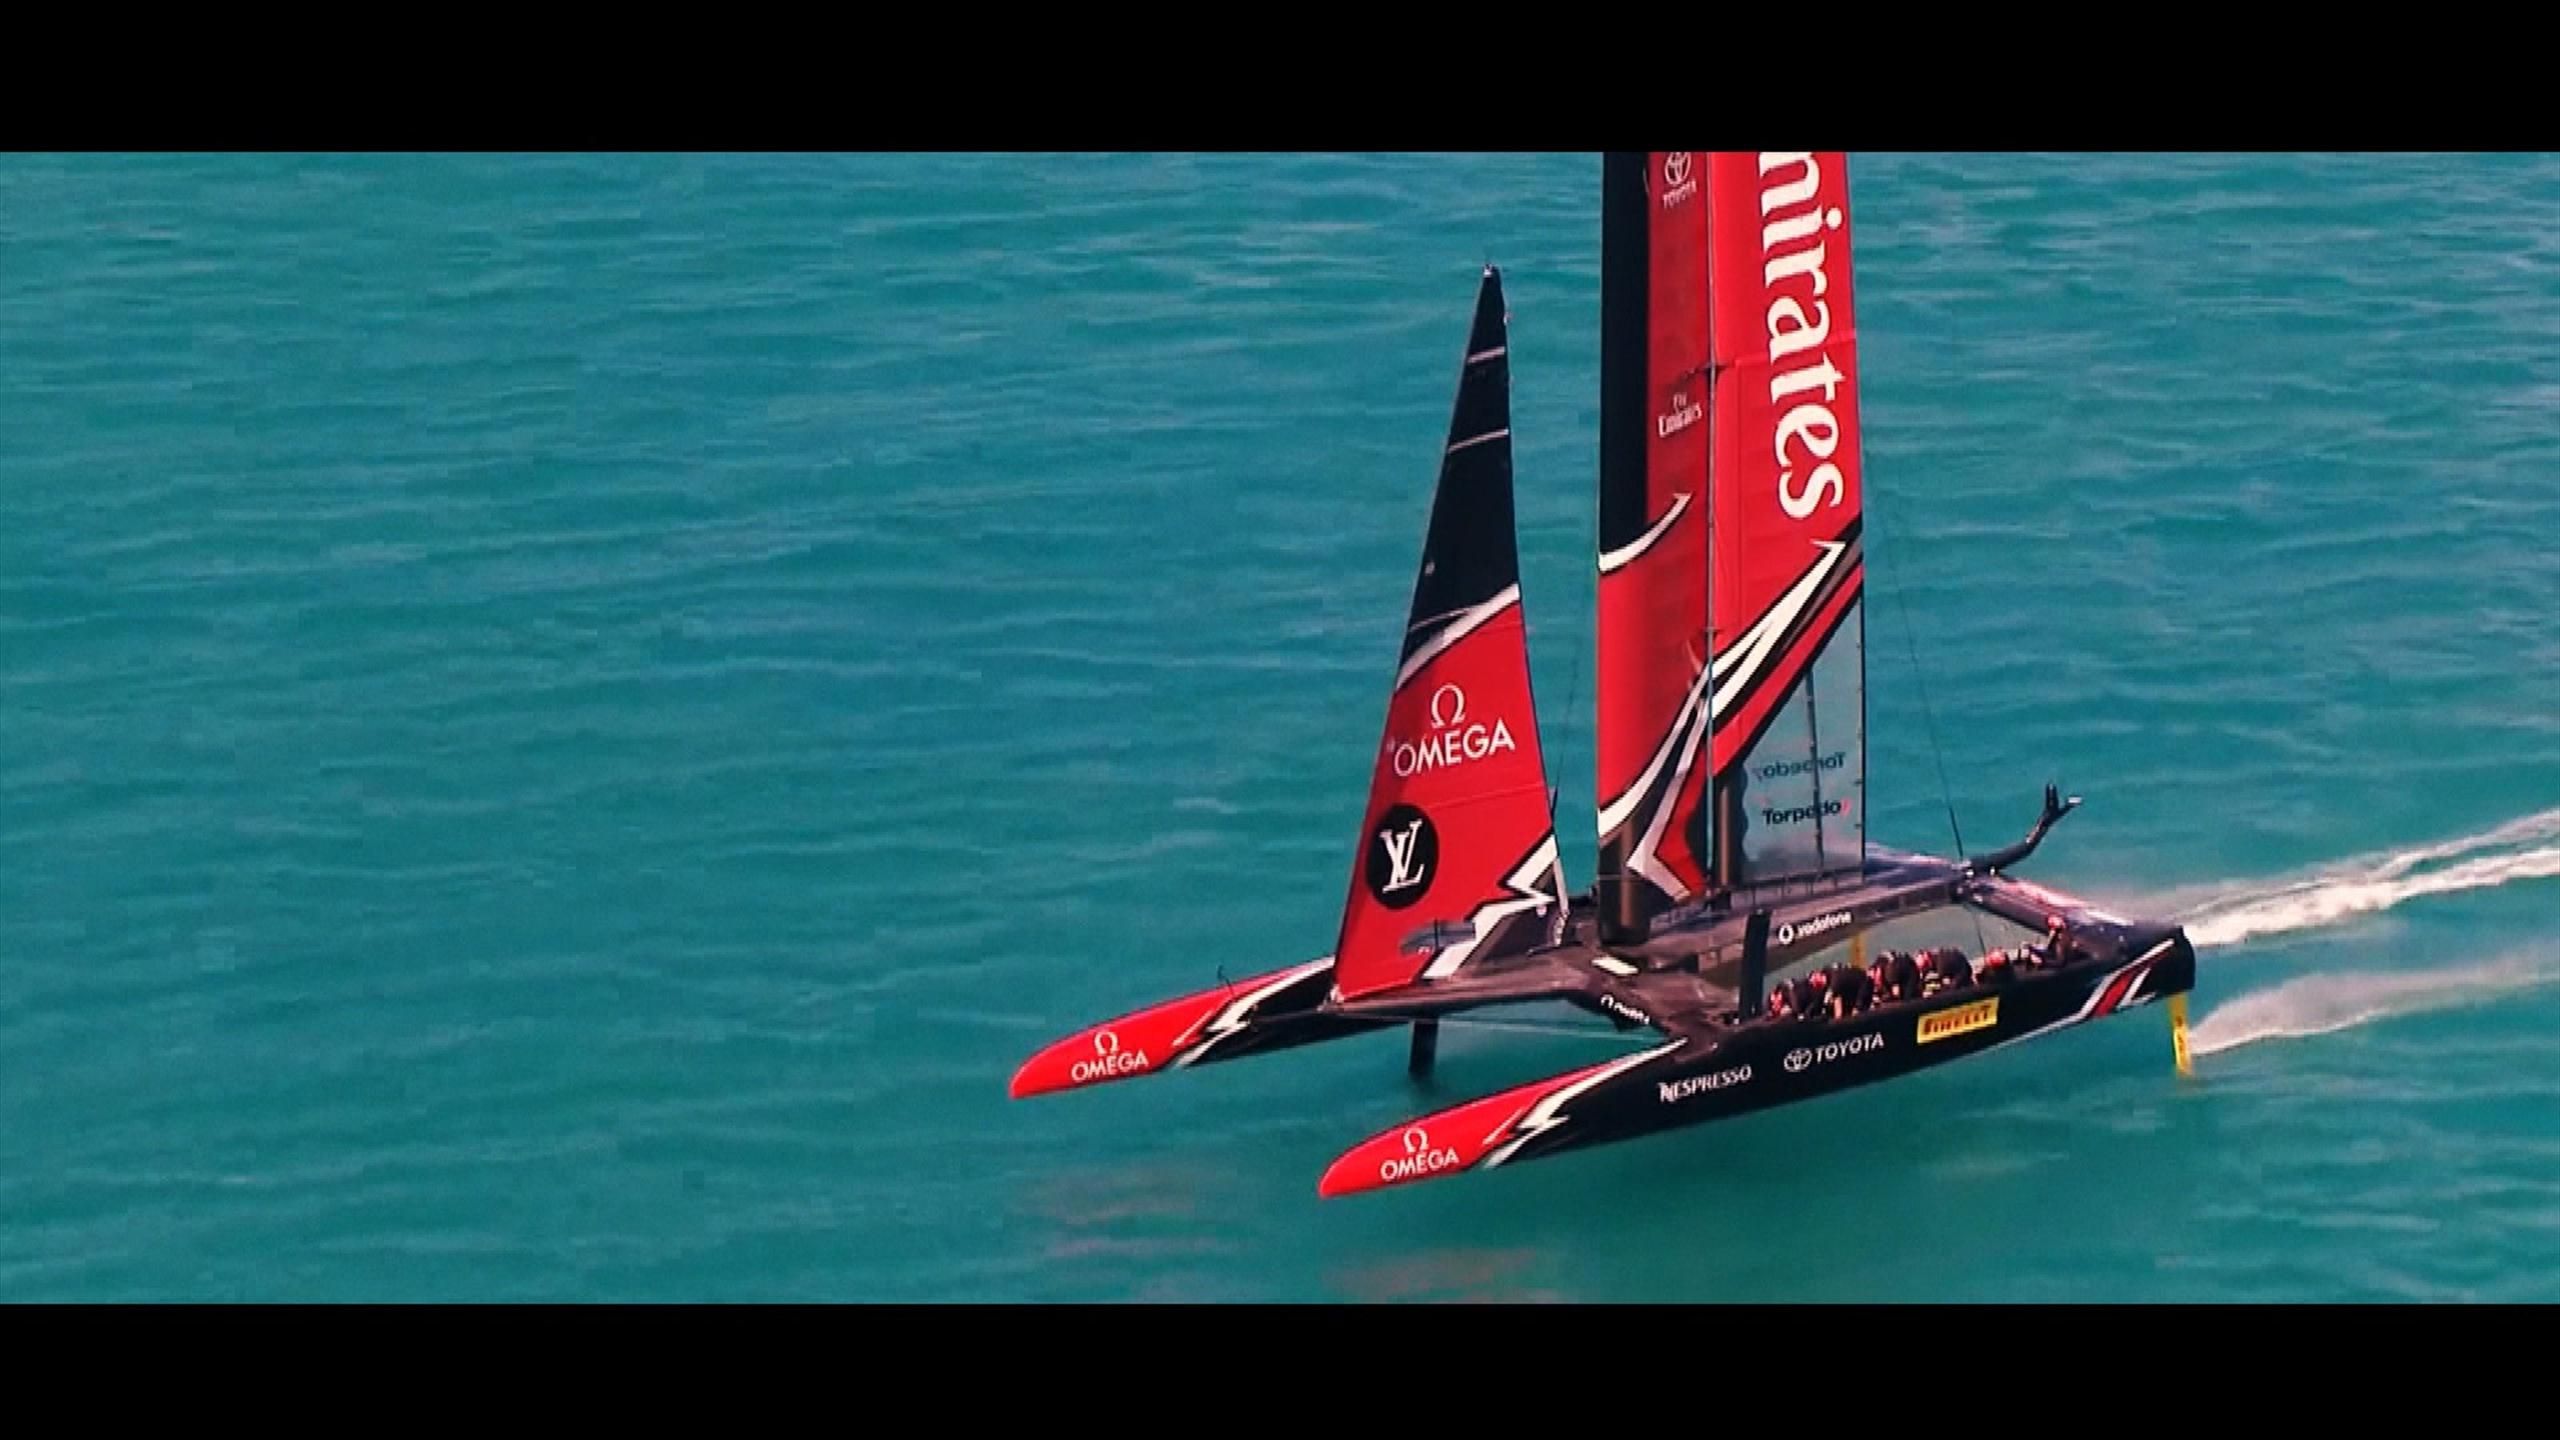 America's Cup explained - Eurosport